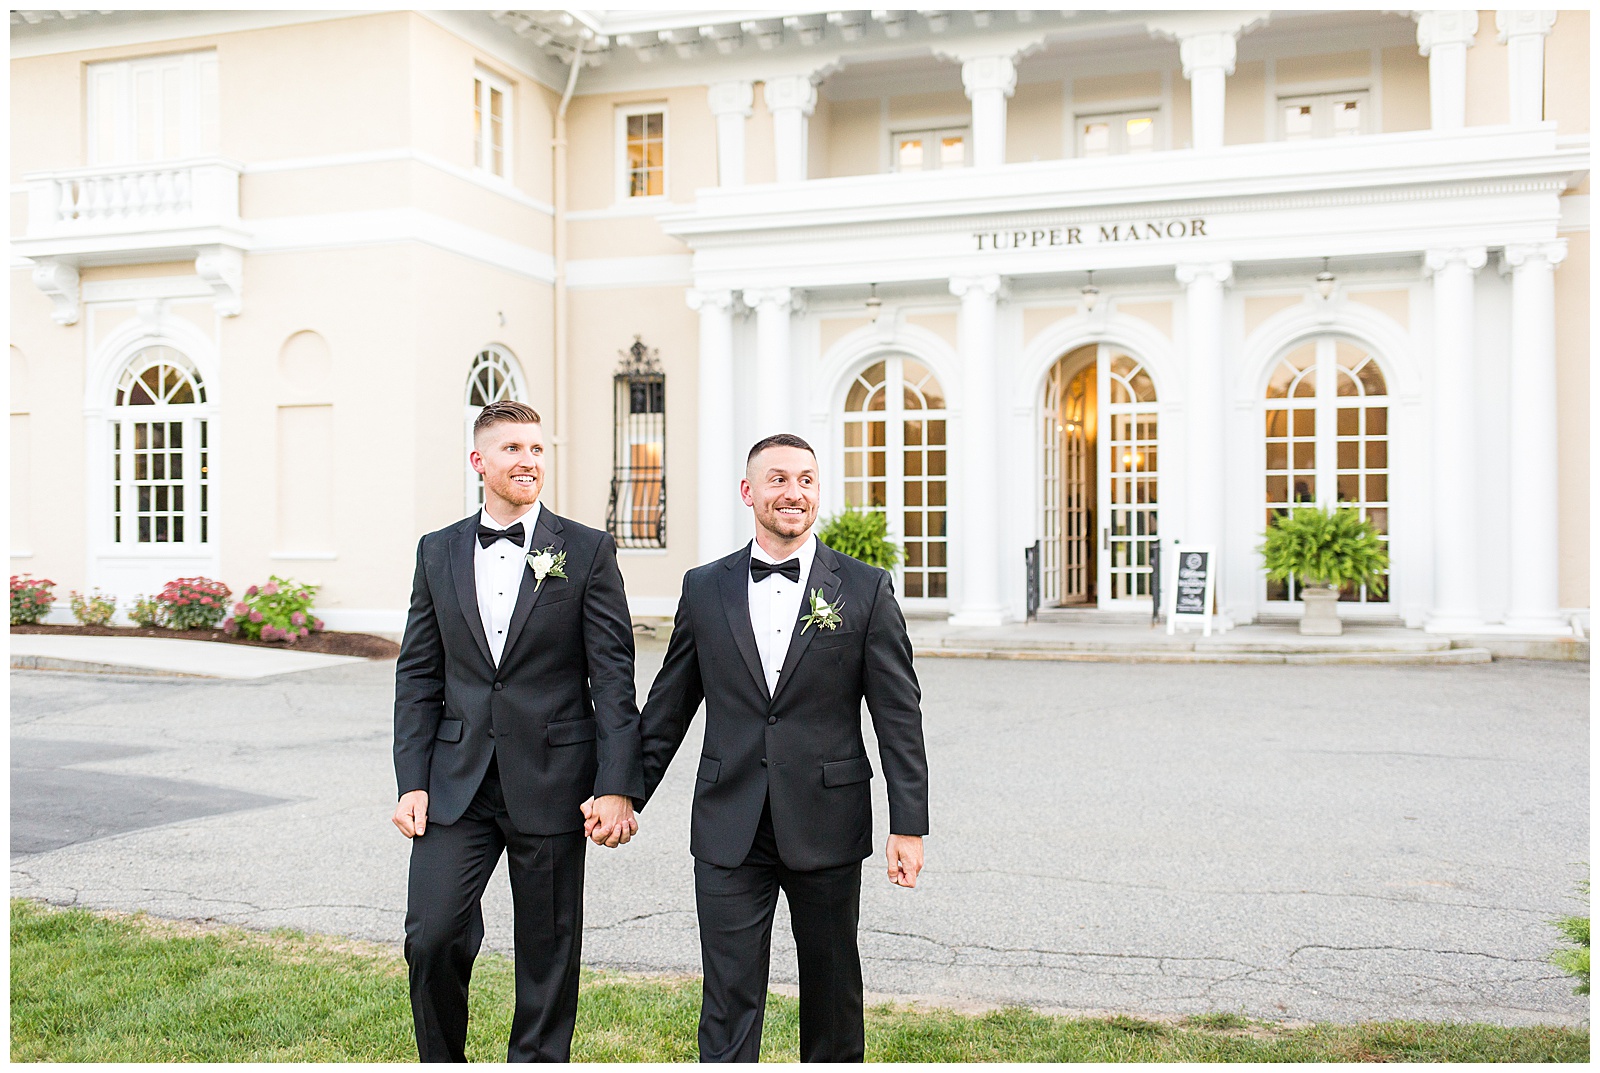 Wedding portraits of grooms at Tupper Manor